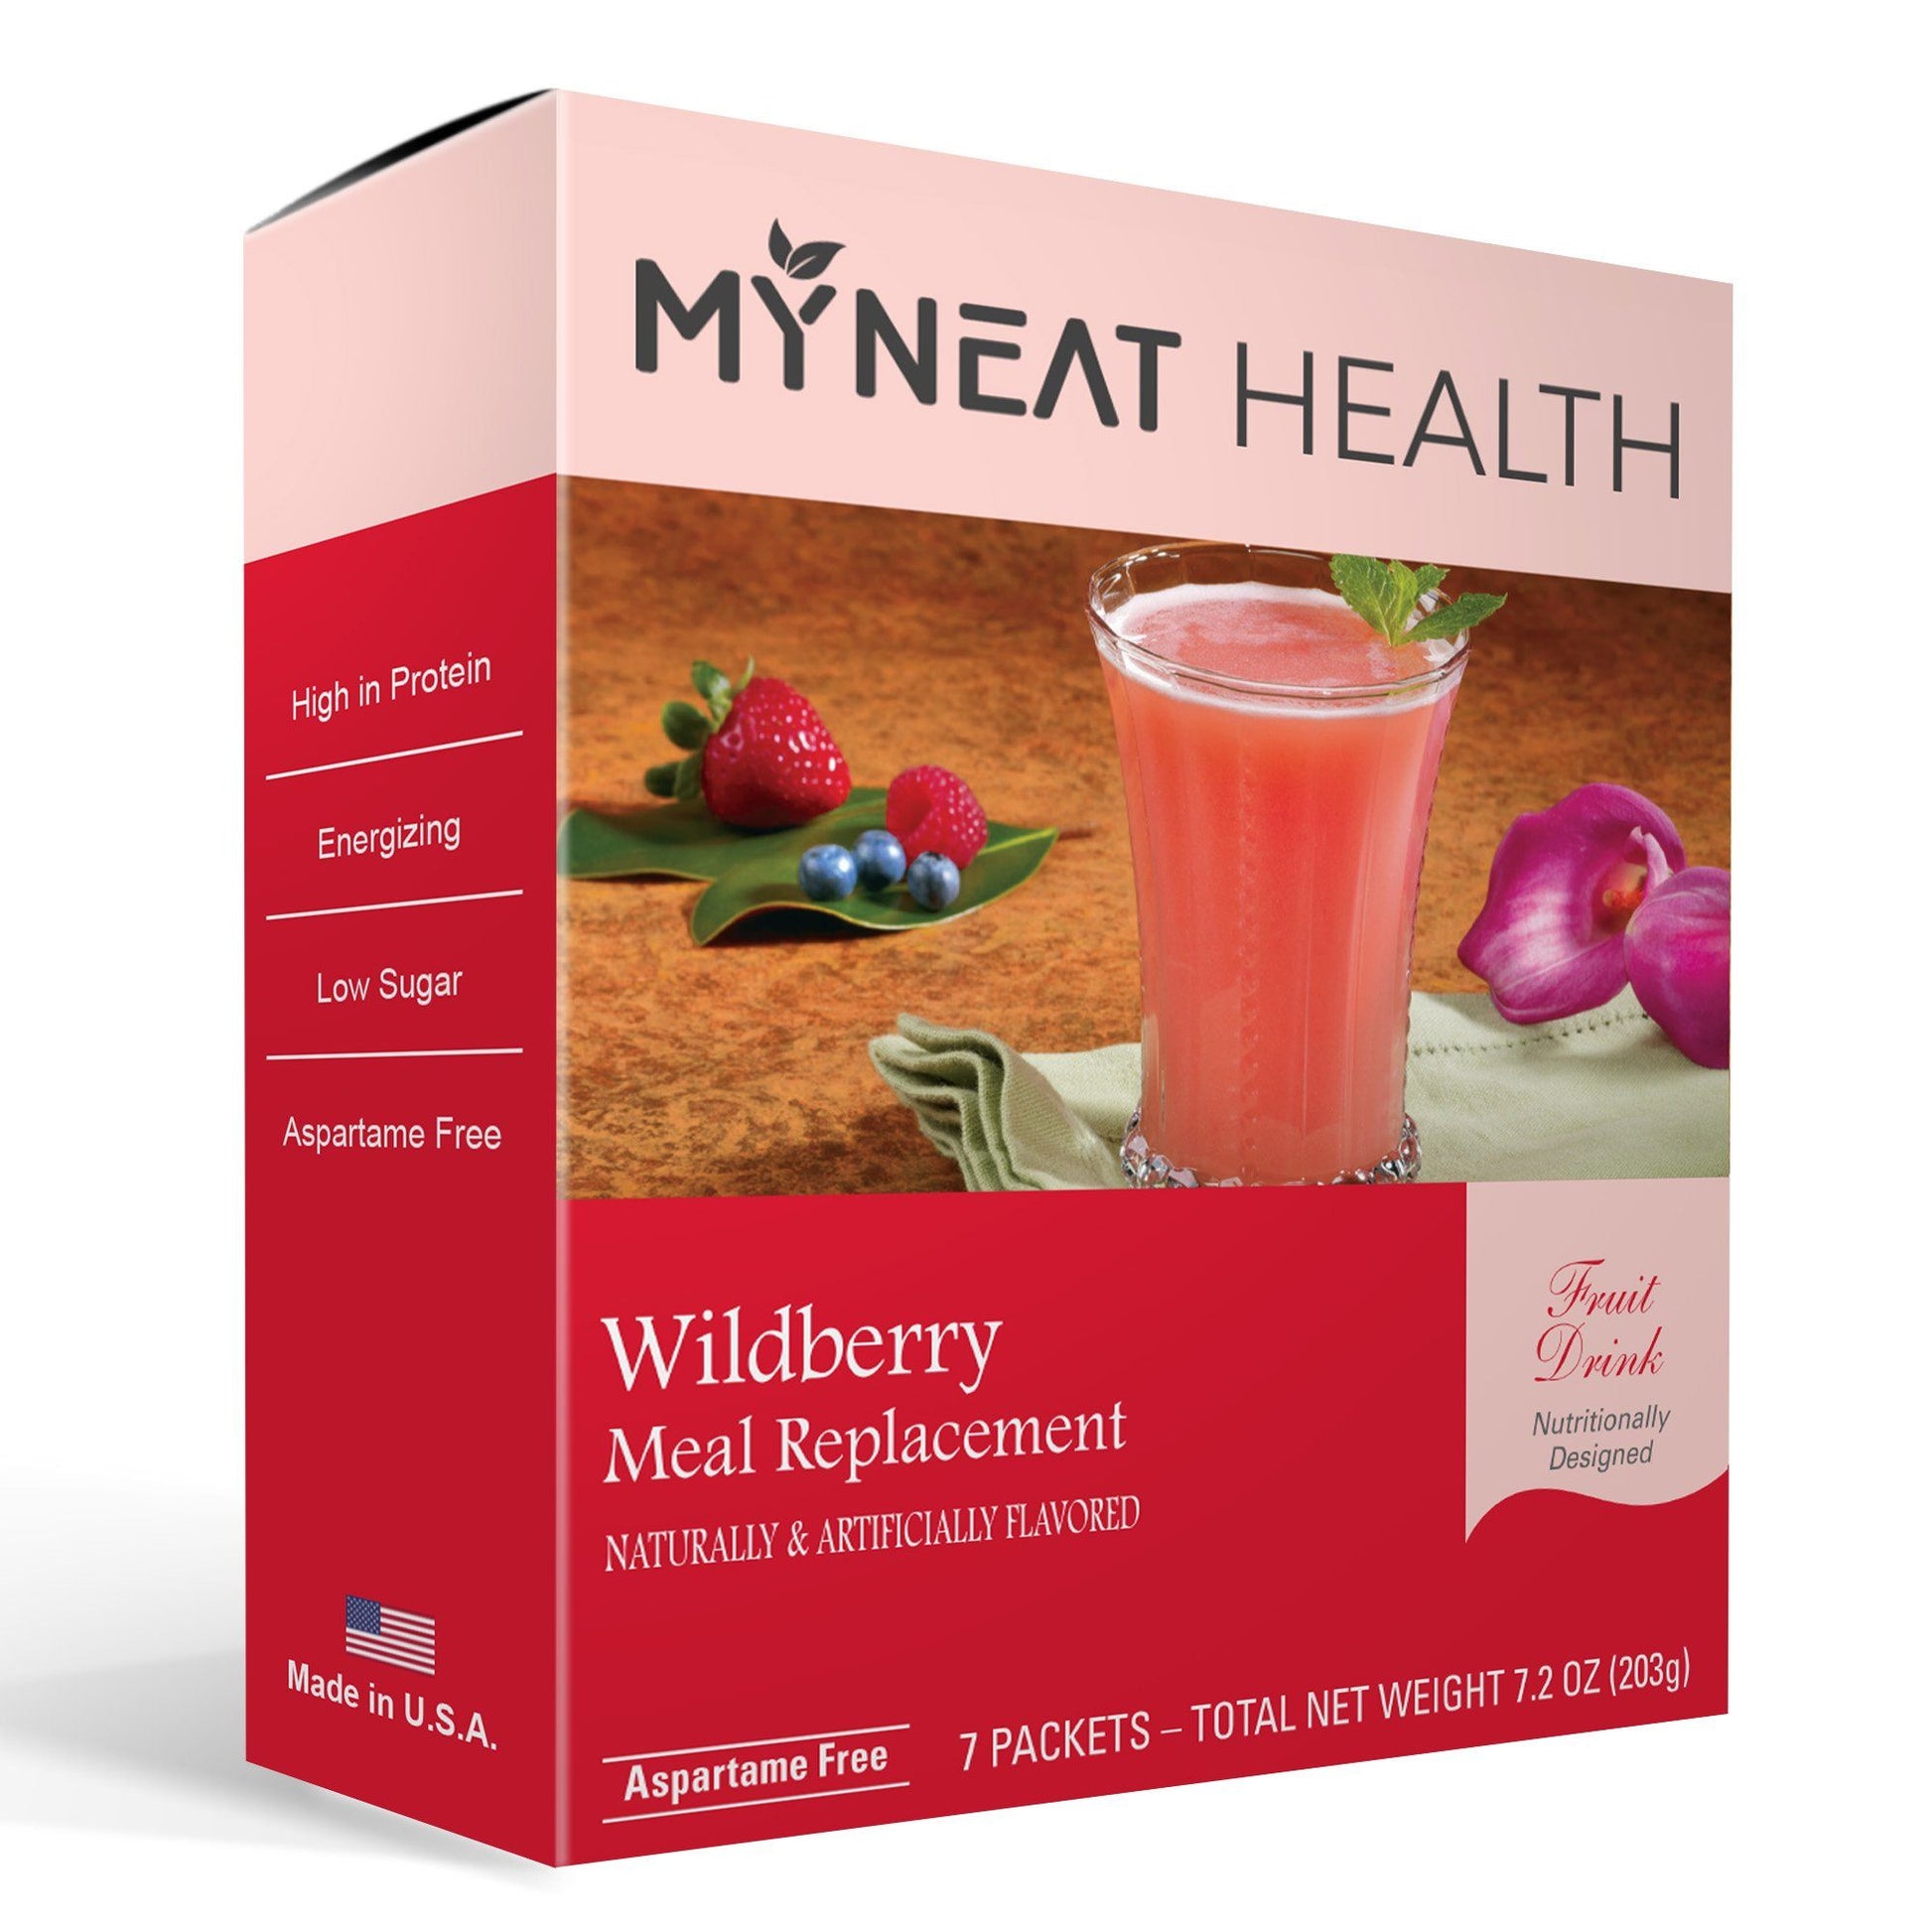 Wildberry meal replacement fruit drink